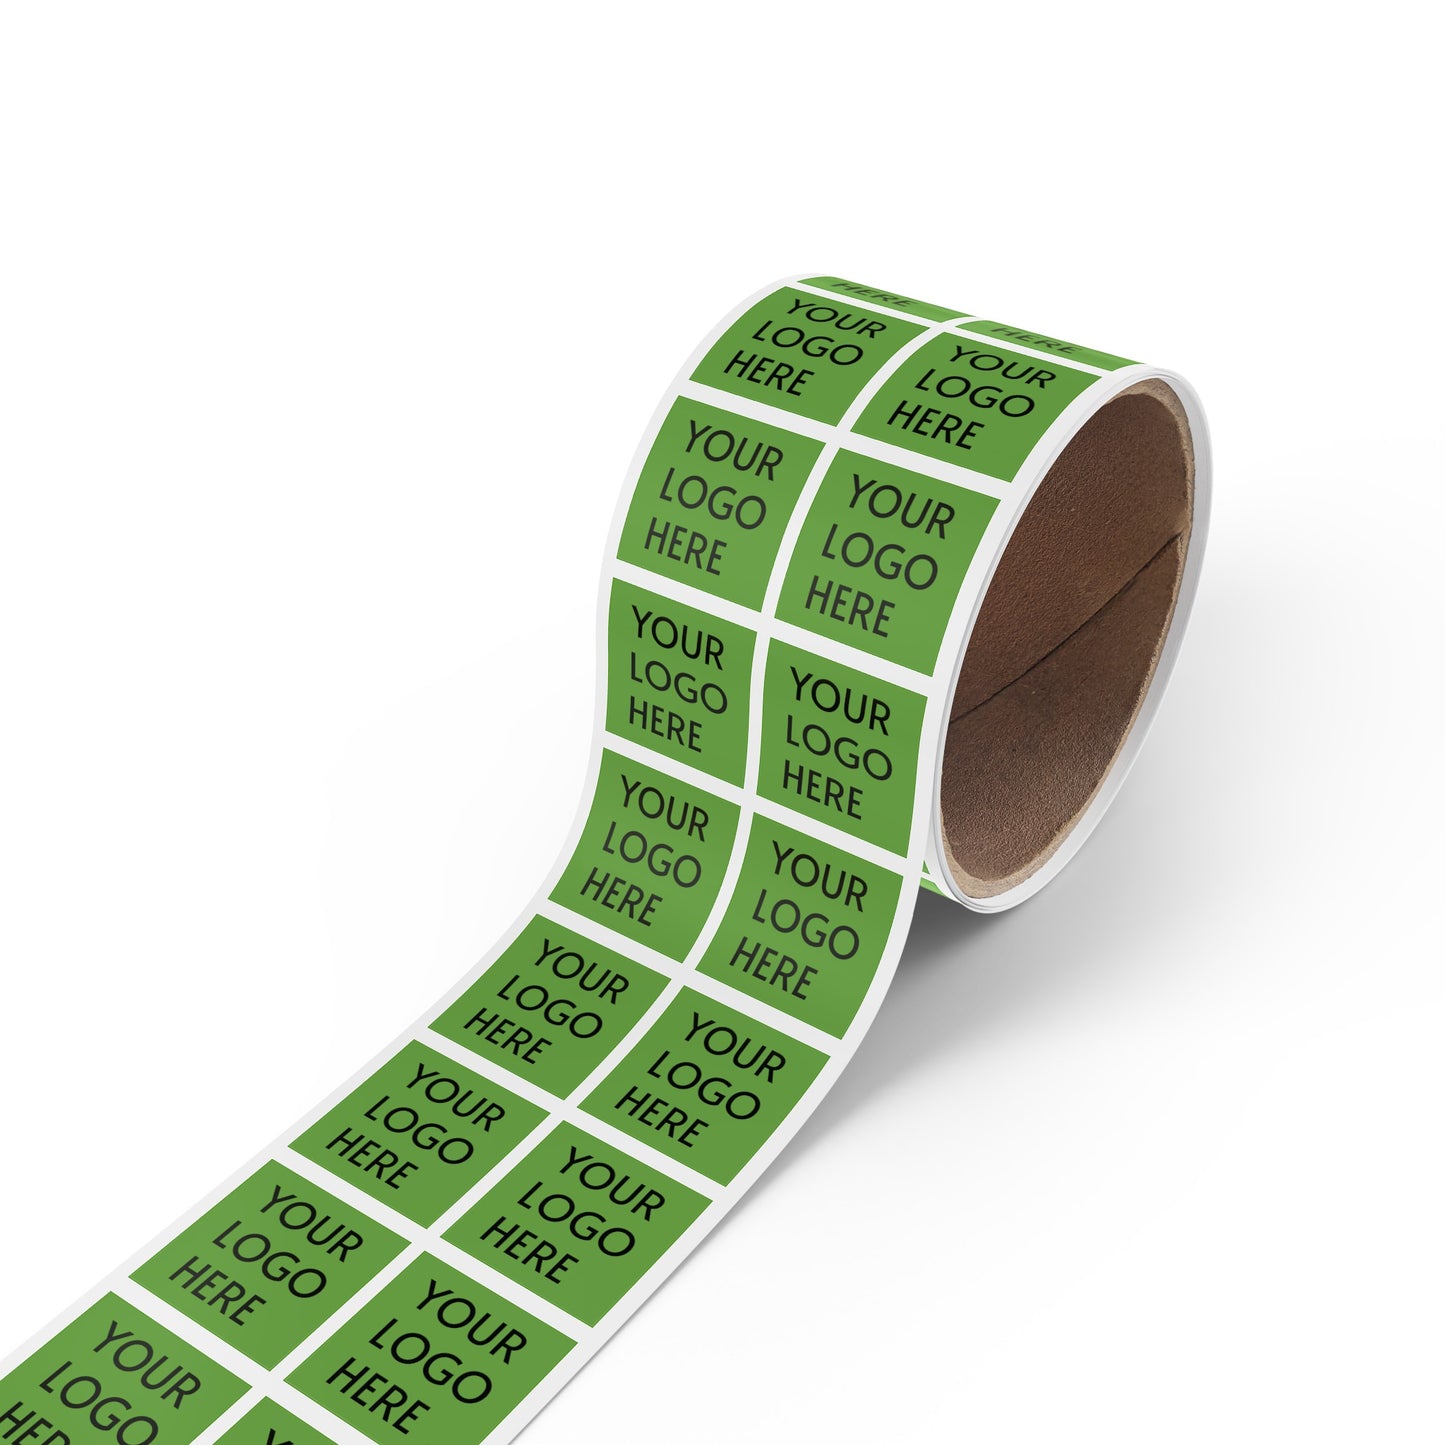 Custom square sticker label roll with vibrant colors